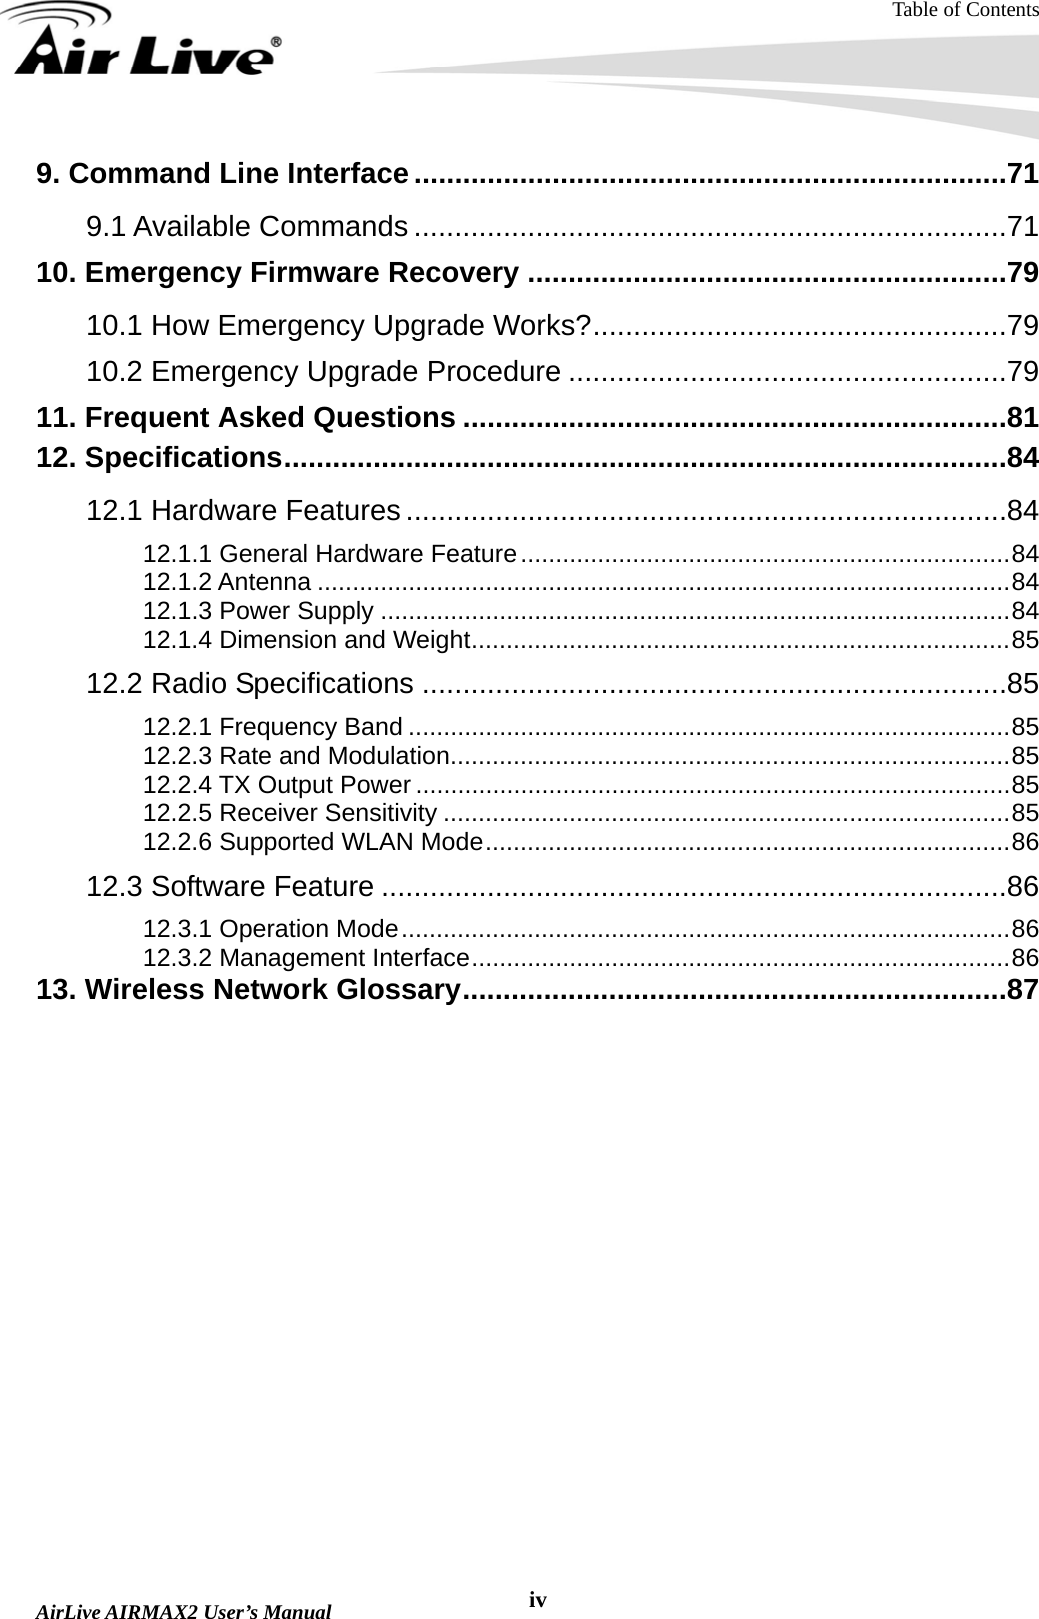 Table of Contents  AirLive AIRMAX2 User’s Manual  iv9. Command Line Interface.........................................................................71 9.1 Available Commands .........................................................................71 10. Emergency Firmware Recovery ...........................................................79 10.1 How Emergency Upgrade Works?...................................................79 10.2 Emergency Upgrade Procedure ......................................................79 11. Frequent Asked Questions ...................................................................81 12. Specifications.........................................................................................84 12.1 Hardware Features ..........................................................................84 12.1.1 General Hardware Feature......................................................................84 12.1.2 Antenna ...................................................................................................84 12.1.3 Power Supply ..........................................................................................84 12.1.4 Dimension and Weight.............................................................................85 12.2 Radio Specifications ........................................................................85 12.2.1 Frequency Band ......................................................................................85 12.2.3 Rate and Modulation................................................................................85 12.2.4 TX Output Power .....................................................................................85 12.2.5 Receiver Sensitivity .................................................................................85 12.2.6 Supported WLAN Mode...........................................................................86 12.3 Software Feature .............................................................................86 12.3.1 Operation Mode.......................................................................................86 12.3.2 Management Interface.............................................................................86 13. Wireless Network Glossary...................................................................87  